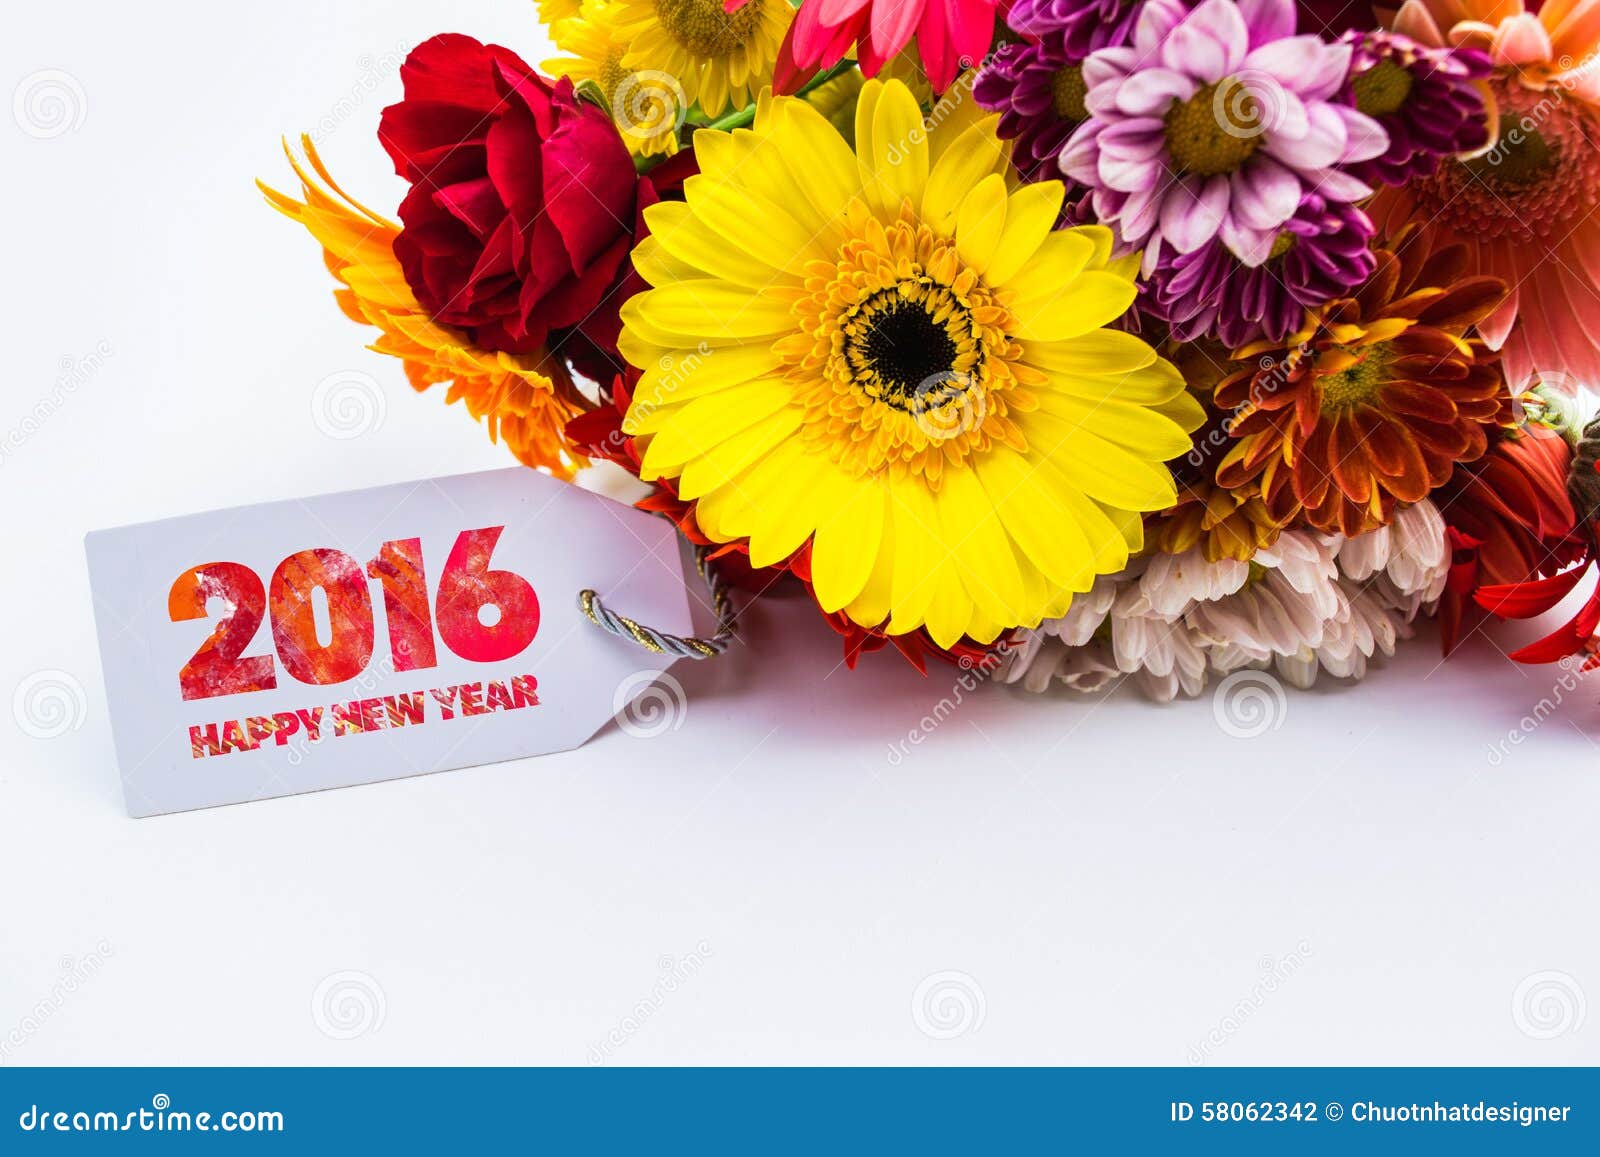 26,940 Happy New Year Flower Stock Photos - Free & Royalty-Free Stock  Photos from Dreamstime